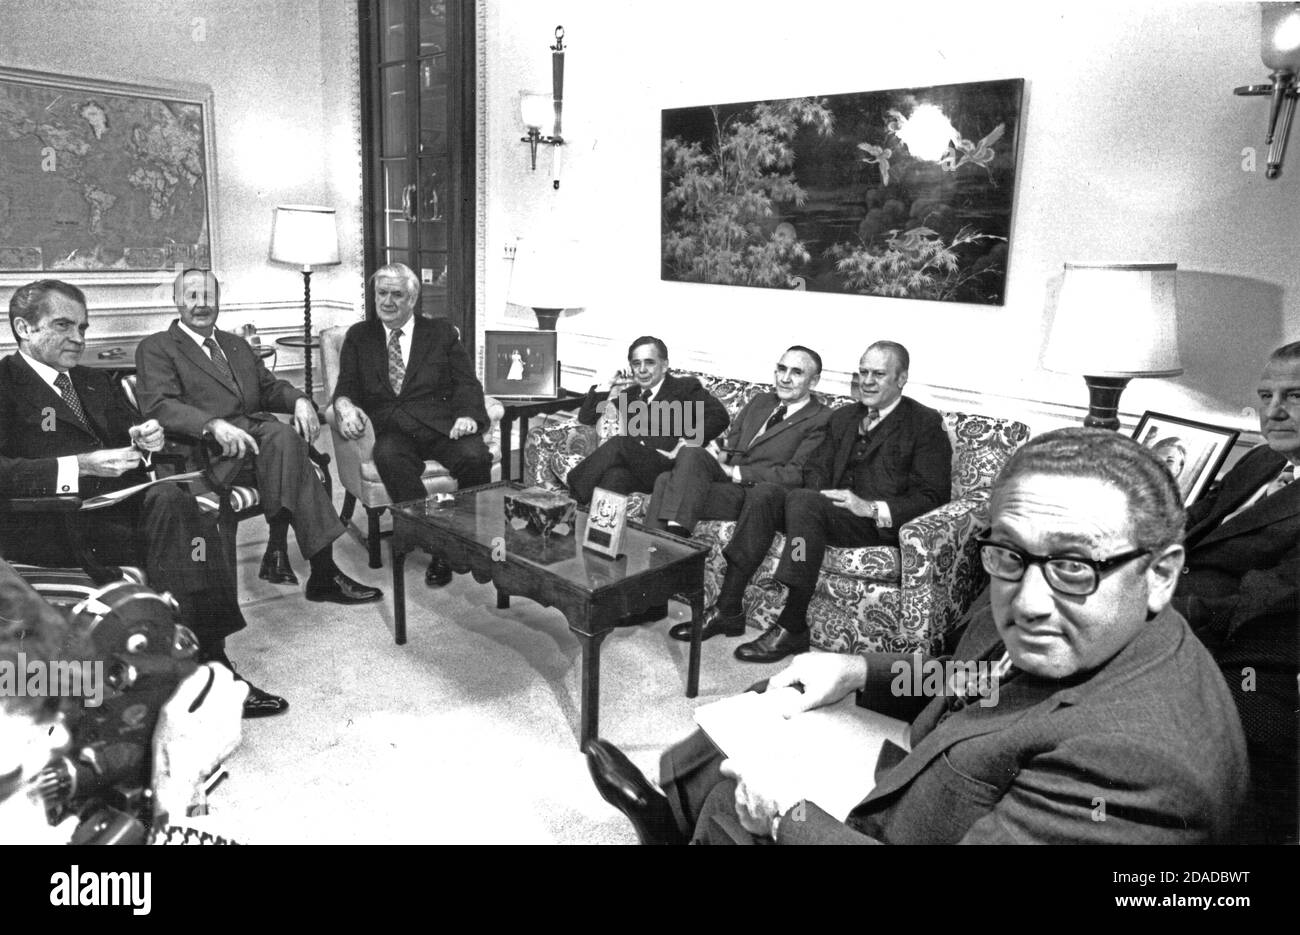 In this photo released by the White House, United States President Richard M. Nixon, left, meets bipartisan US Congressional leadership prior to his televised address announcing the “conclusion of an agreement for ending the war and restoring peace in Vietnam” in the White House in Washington, DC on January 23, 1973.  From left to right: President Nixon; US Senate Minority Leader Hugh Scott (Republican of Pennsylvania); US House Majority Leader Thomas P. “Tip” O’Neill (Democrat of Massachusetts); Speaker of the US House of Representatives Carl Albert (Democrat of Oklahoma); US Senate Majority Stock Photo